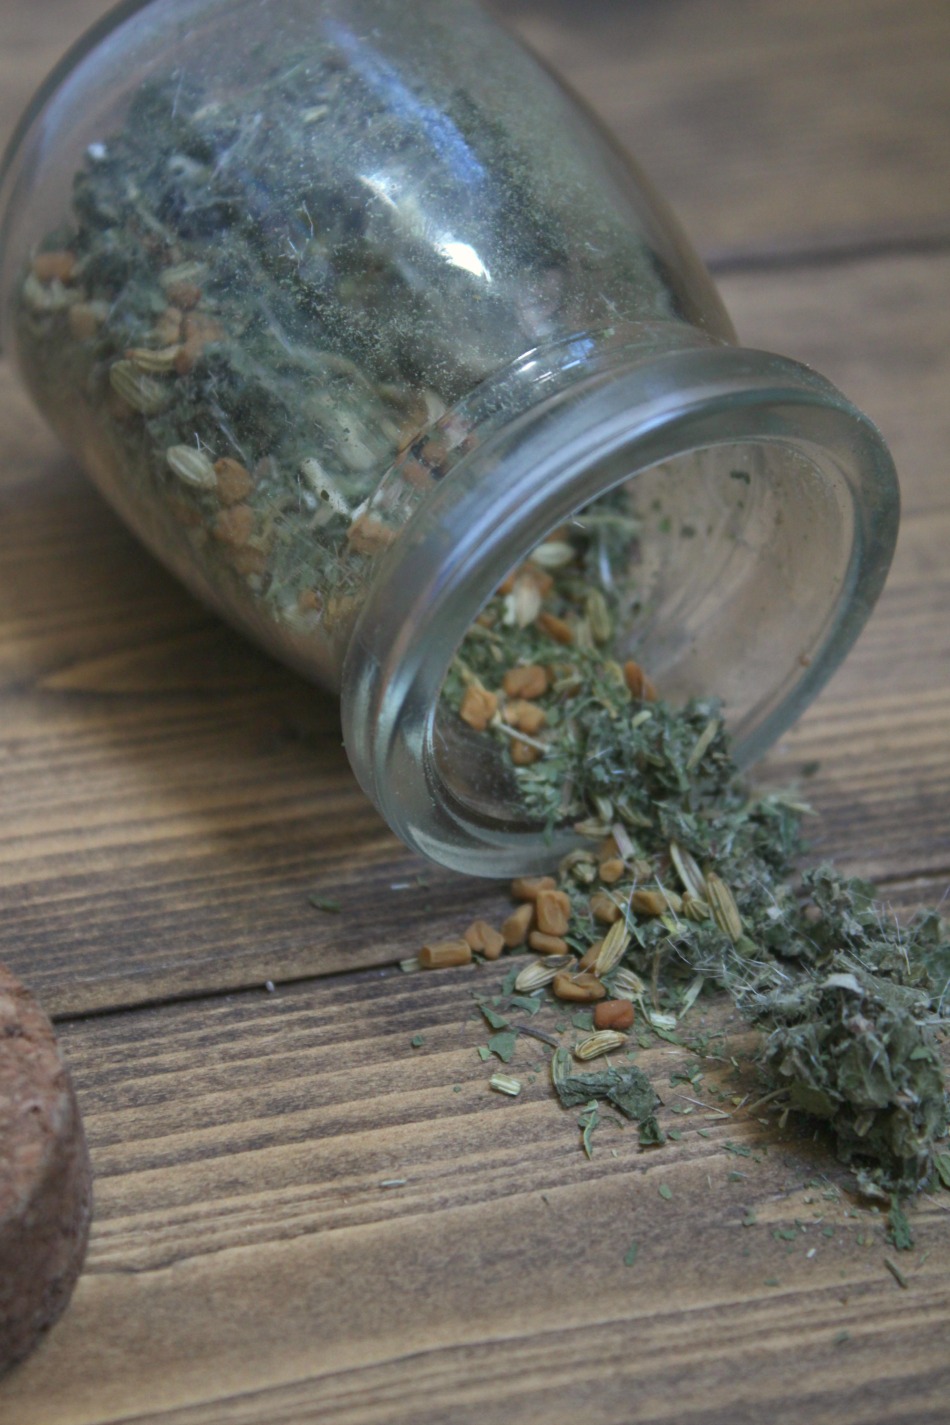 How To Boost Your Milk Supply With This Simple Herbal Blend | Growing Up Herbal | If you're a nursing mama and looking for a natural way to boost your milk supply, this herbal blend may be just the thing to help you and your milk supply.